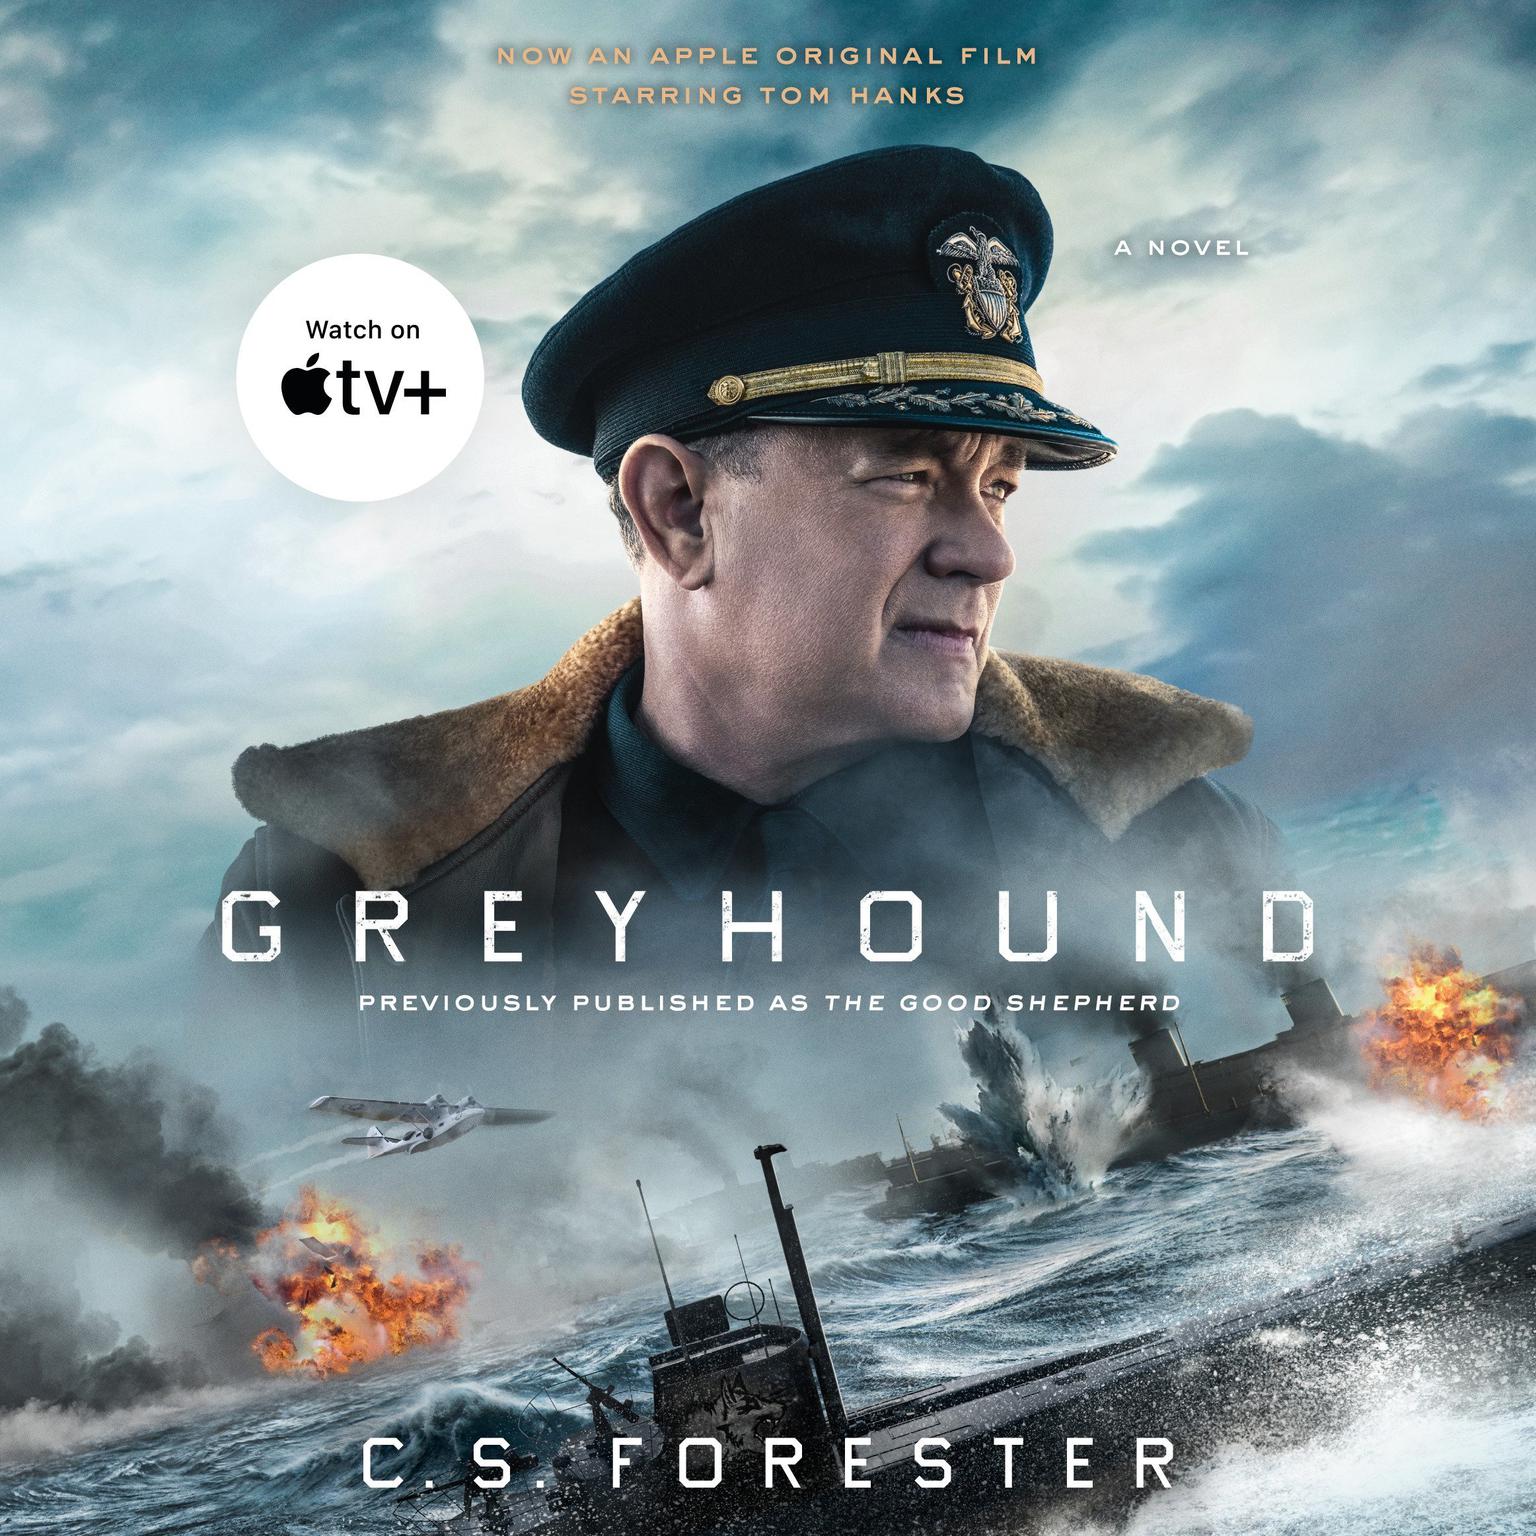 Greyhound (Movie Tie-In): A Novel Audiobook, by C. S. Forester